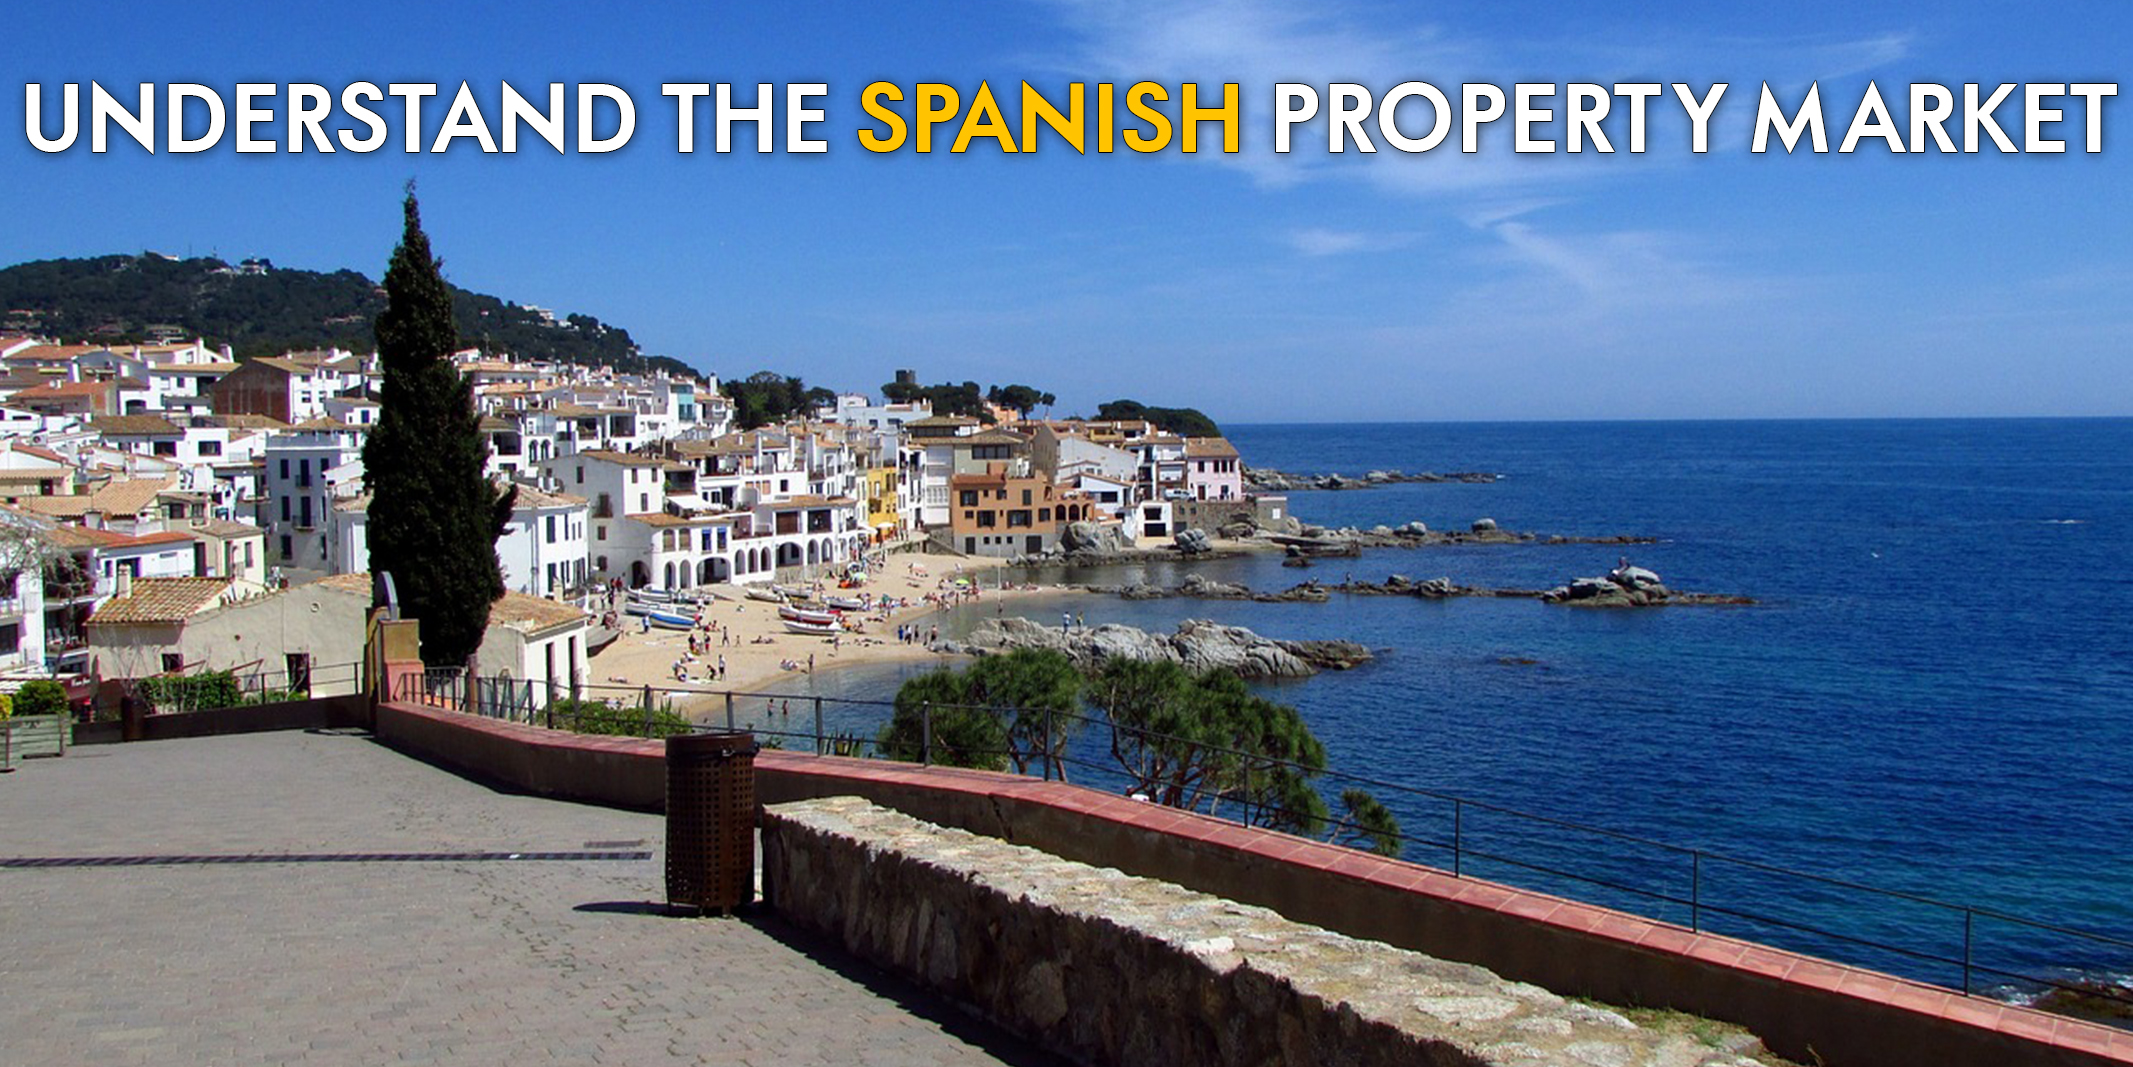 Guide to buying property in Spain and navigating the Spanish property market.